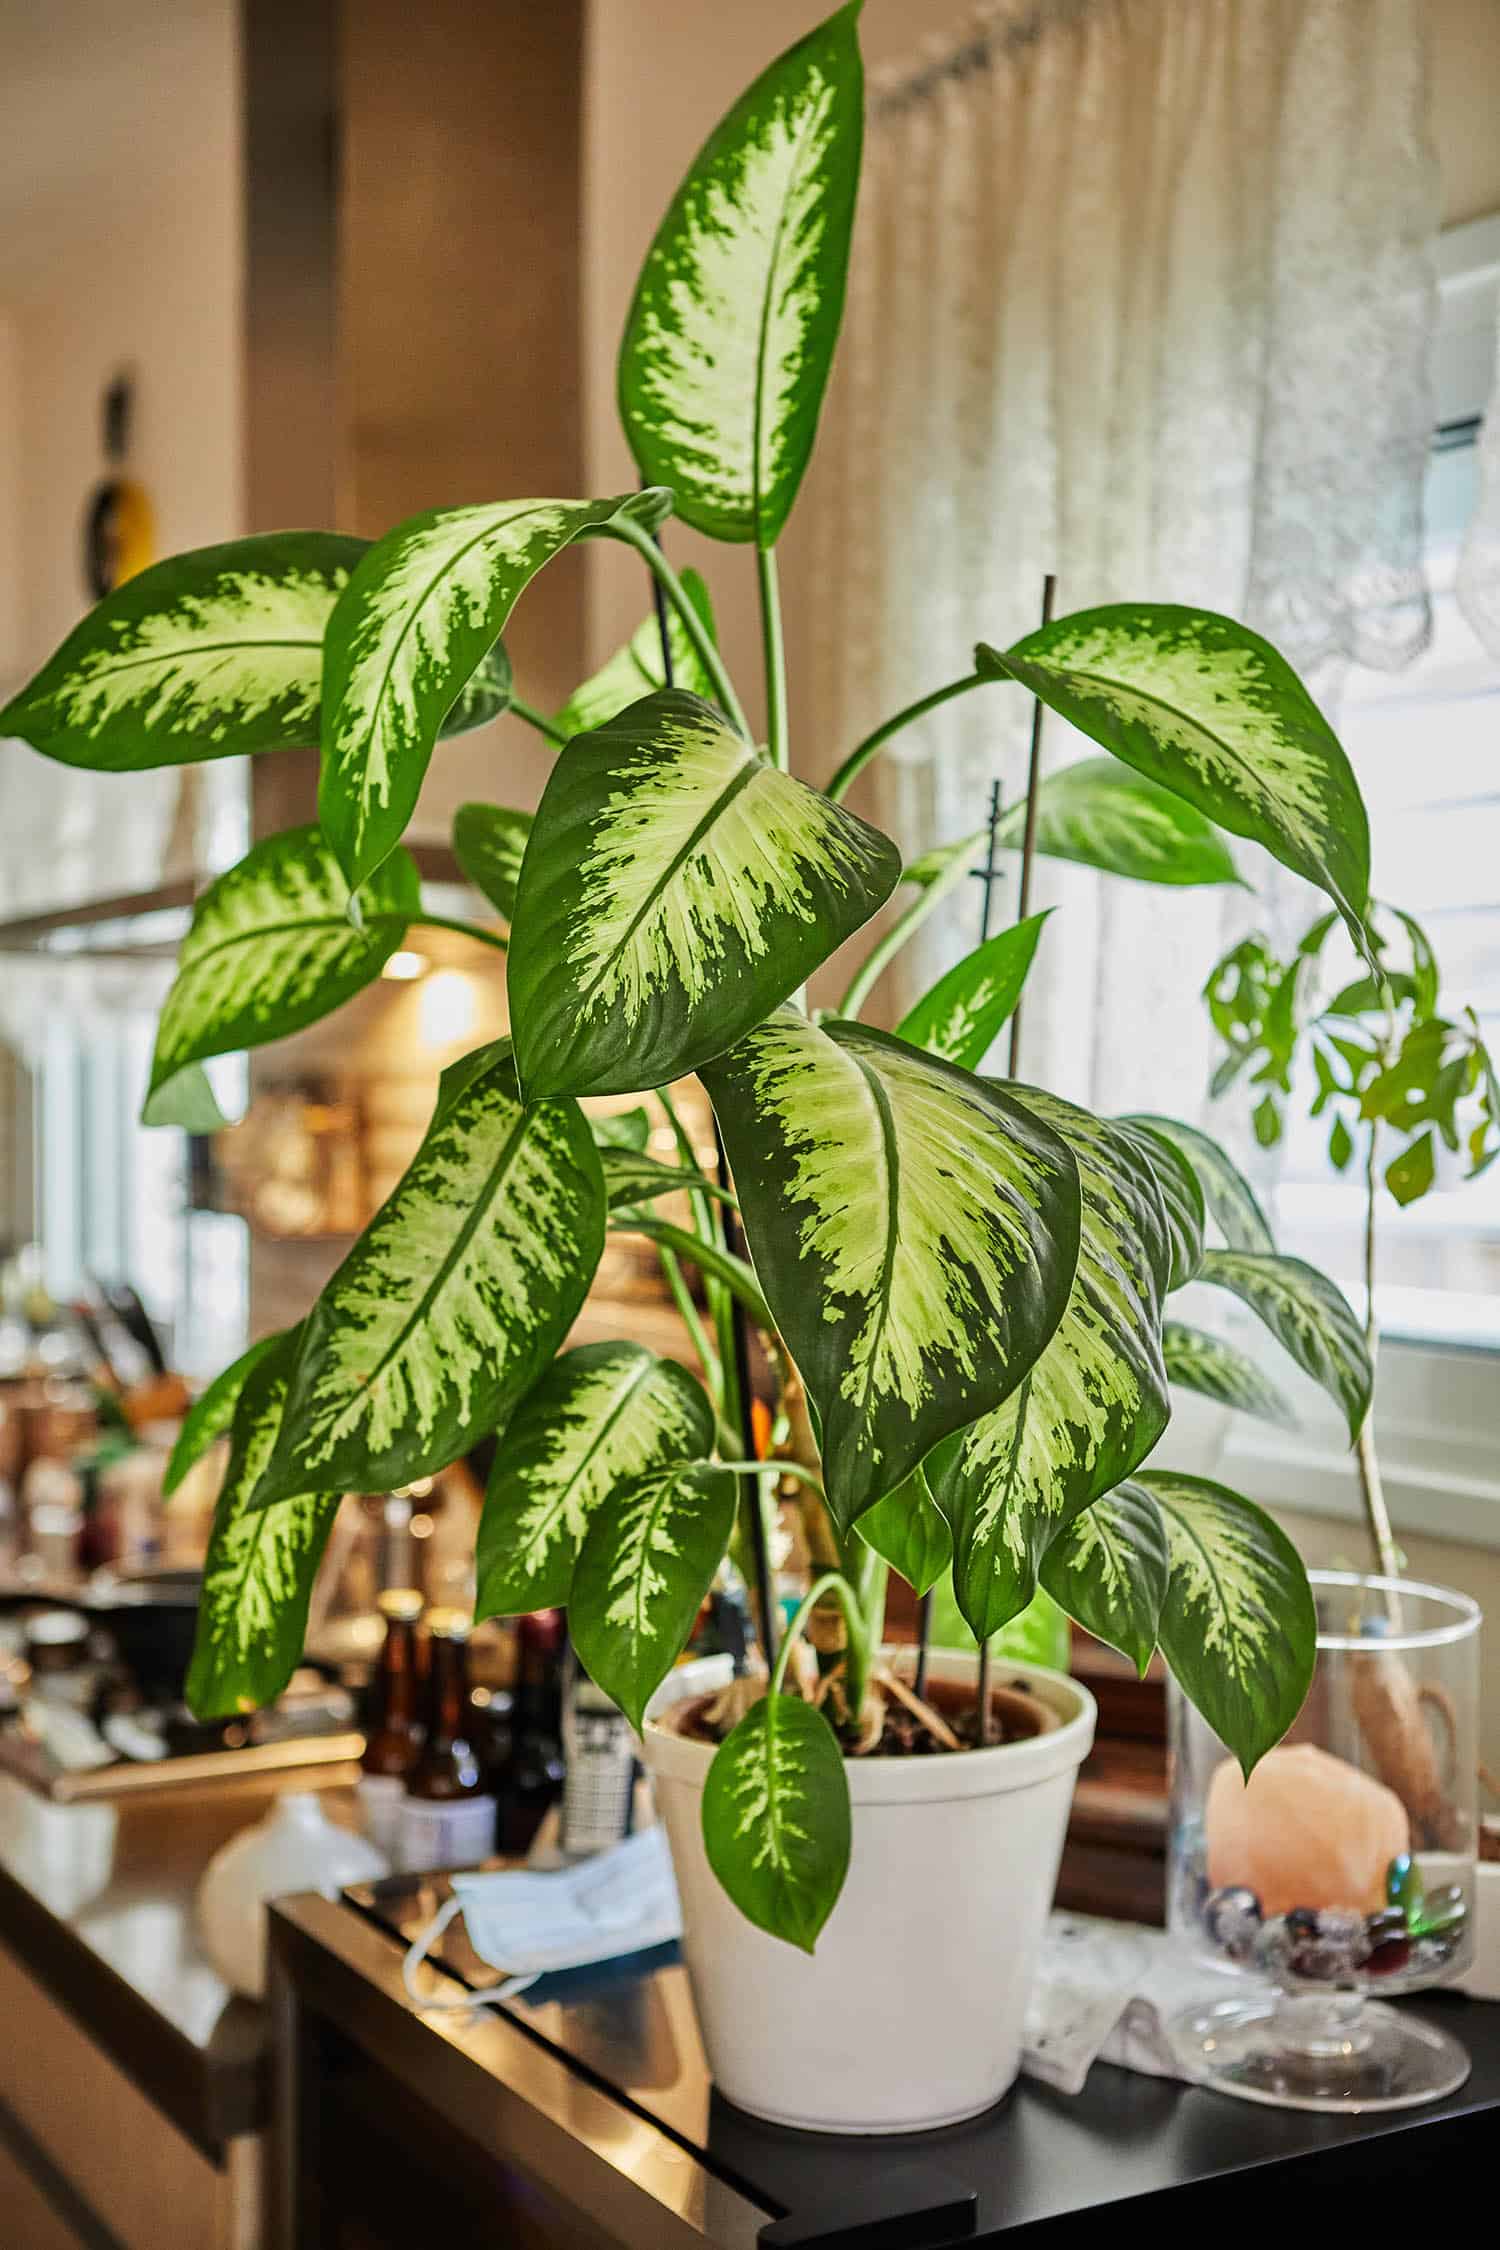 can you propagate a dumb cane from a leaf or stem cutting? - the